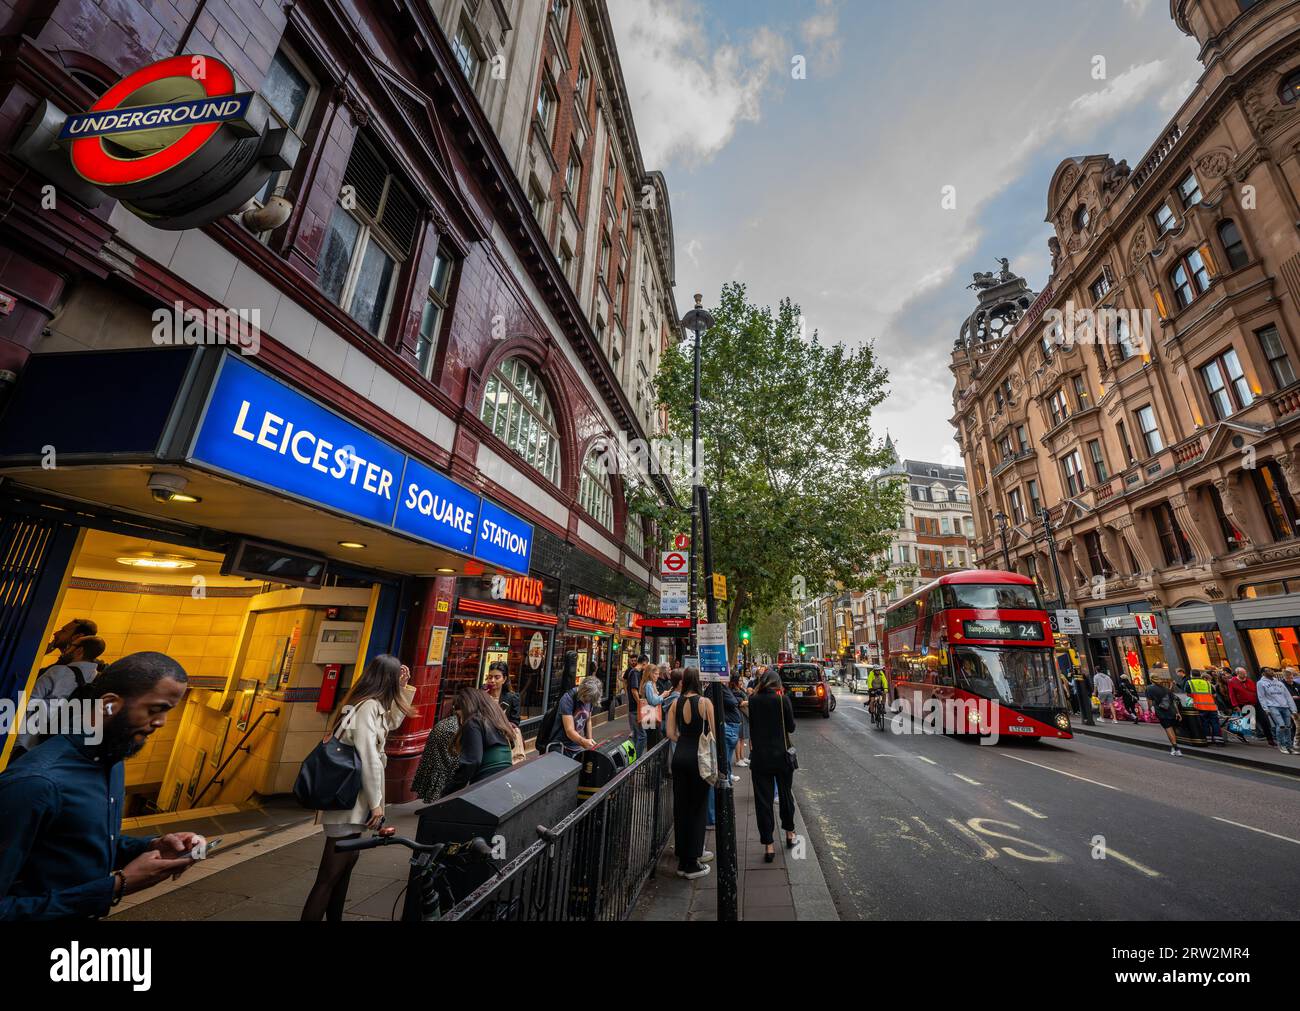 London, UK: Leicester Square underground station on Charing Cross Road located in London's West End. With red London bus. Stock Photo